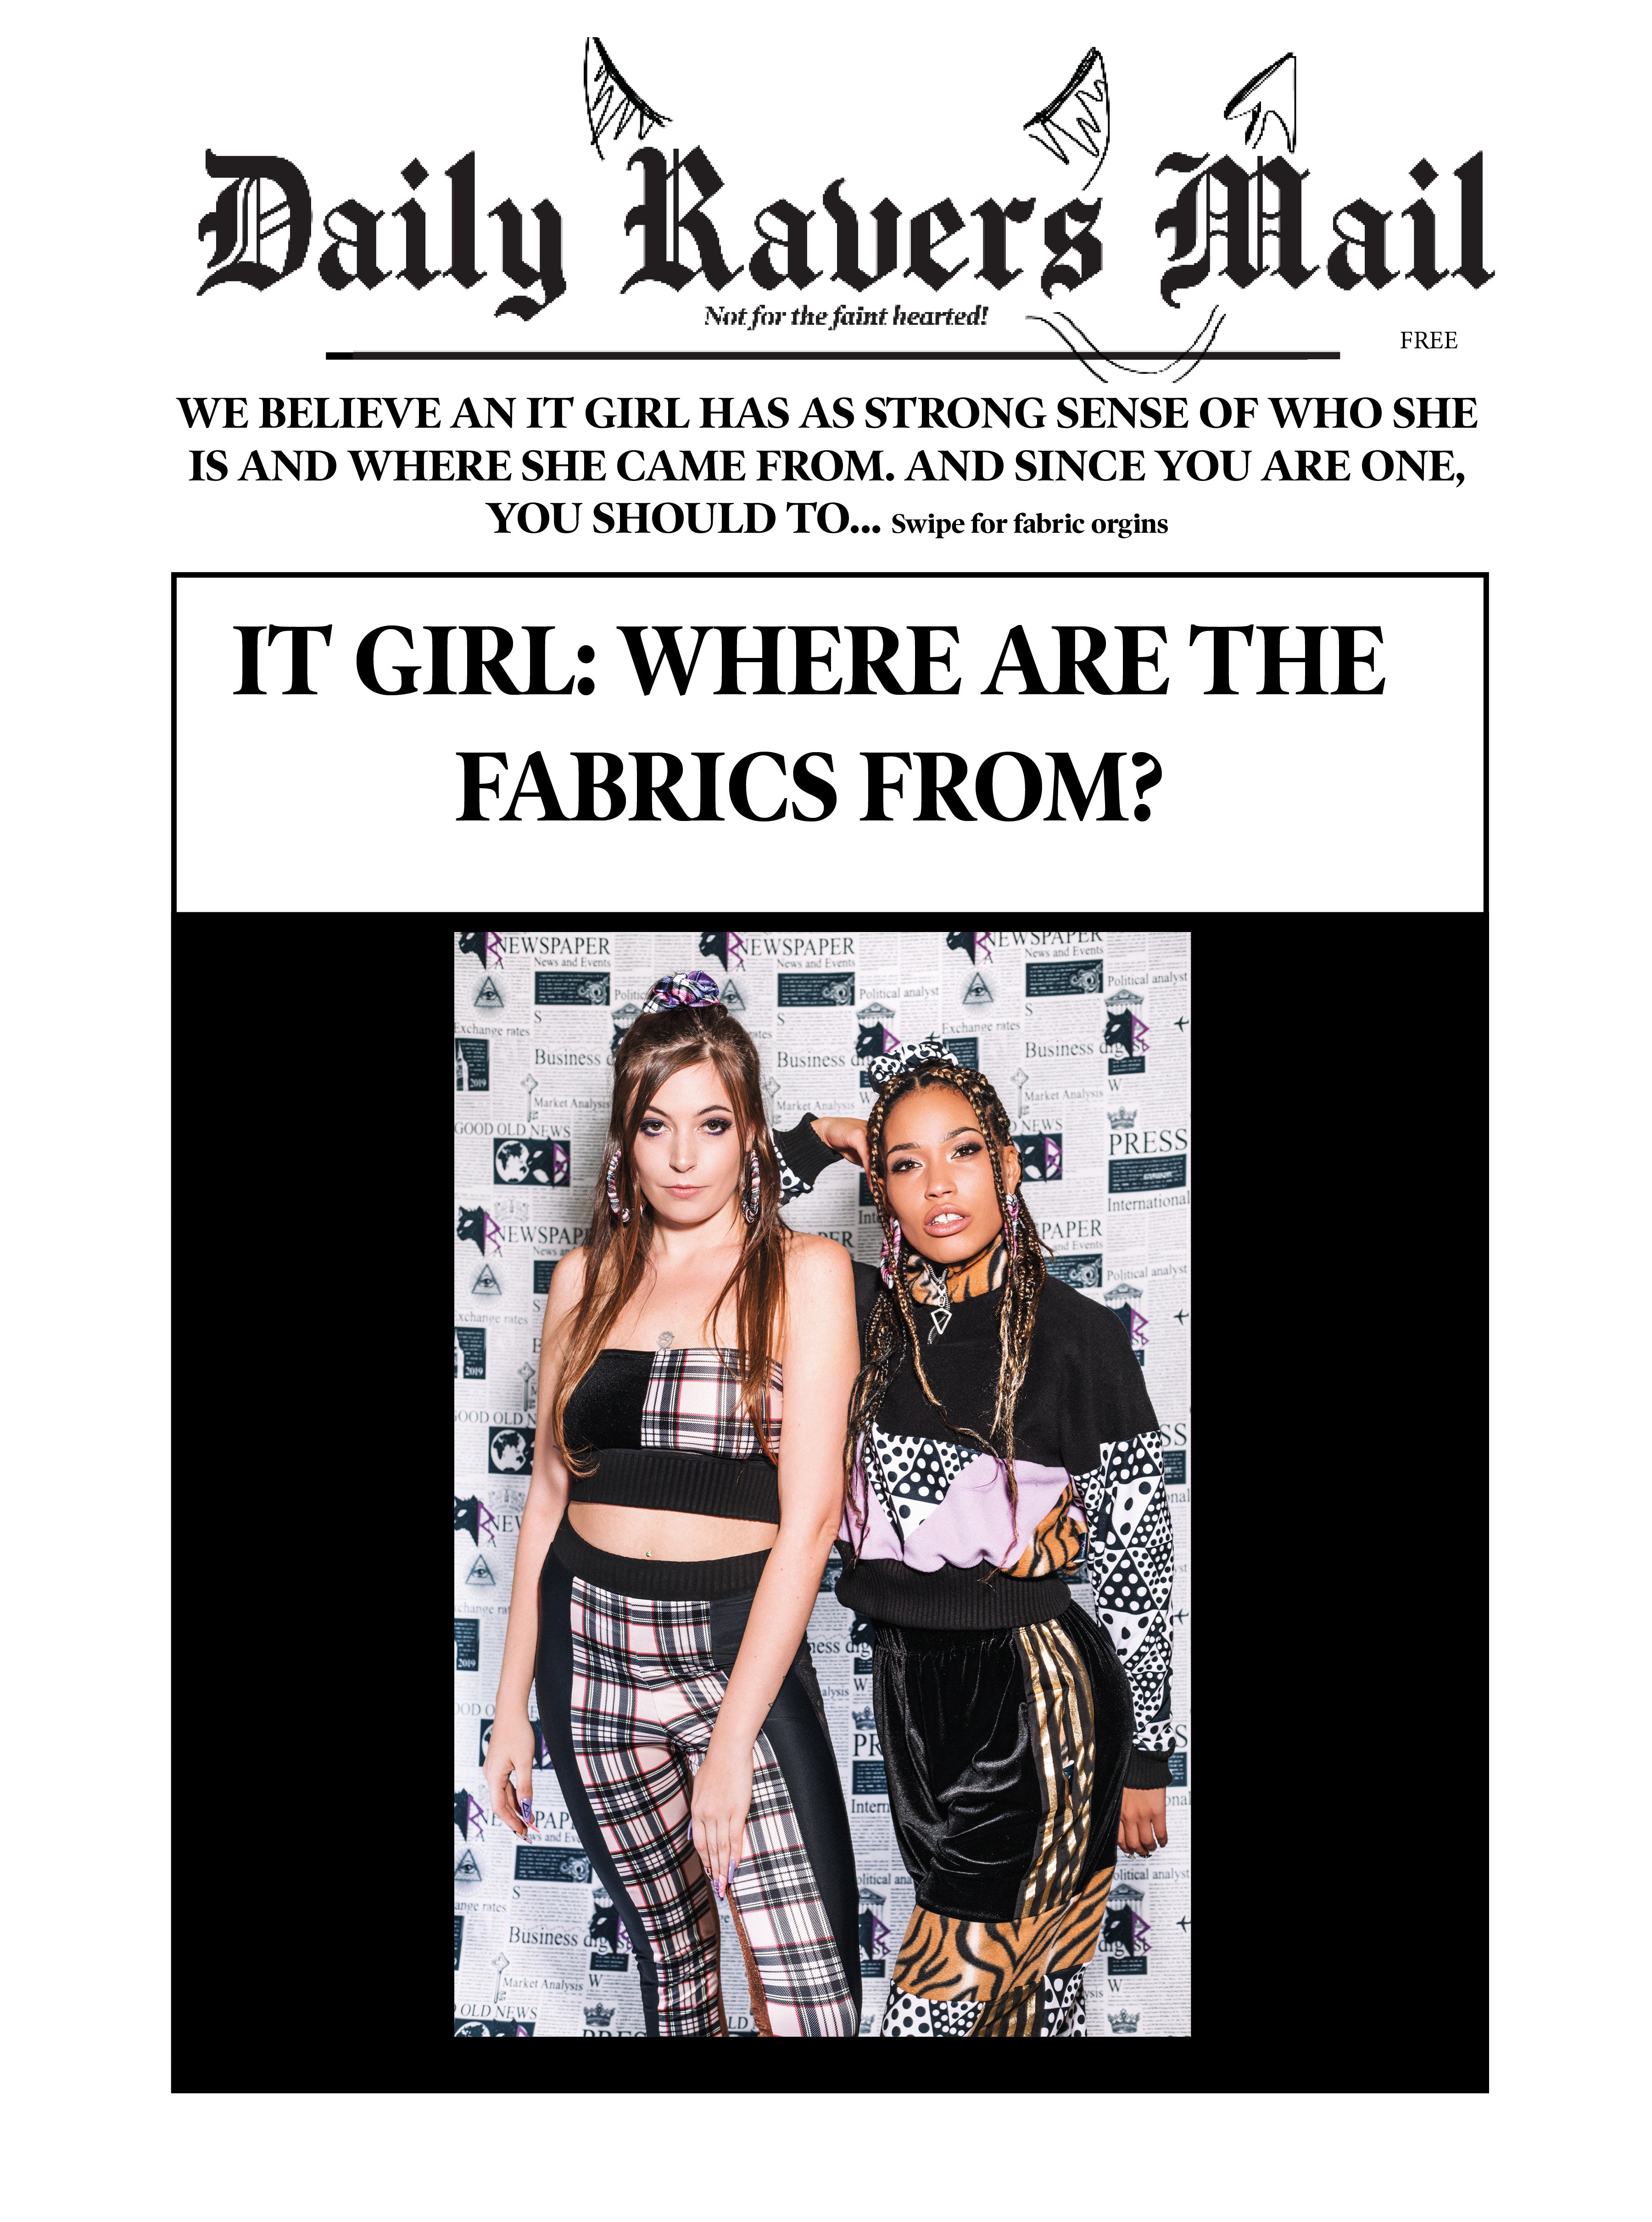 IT GIRL:  Where are the fabrics from?